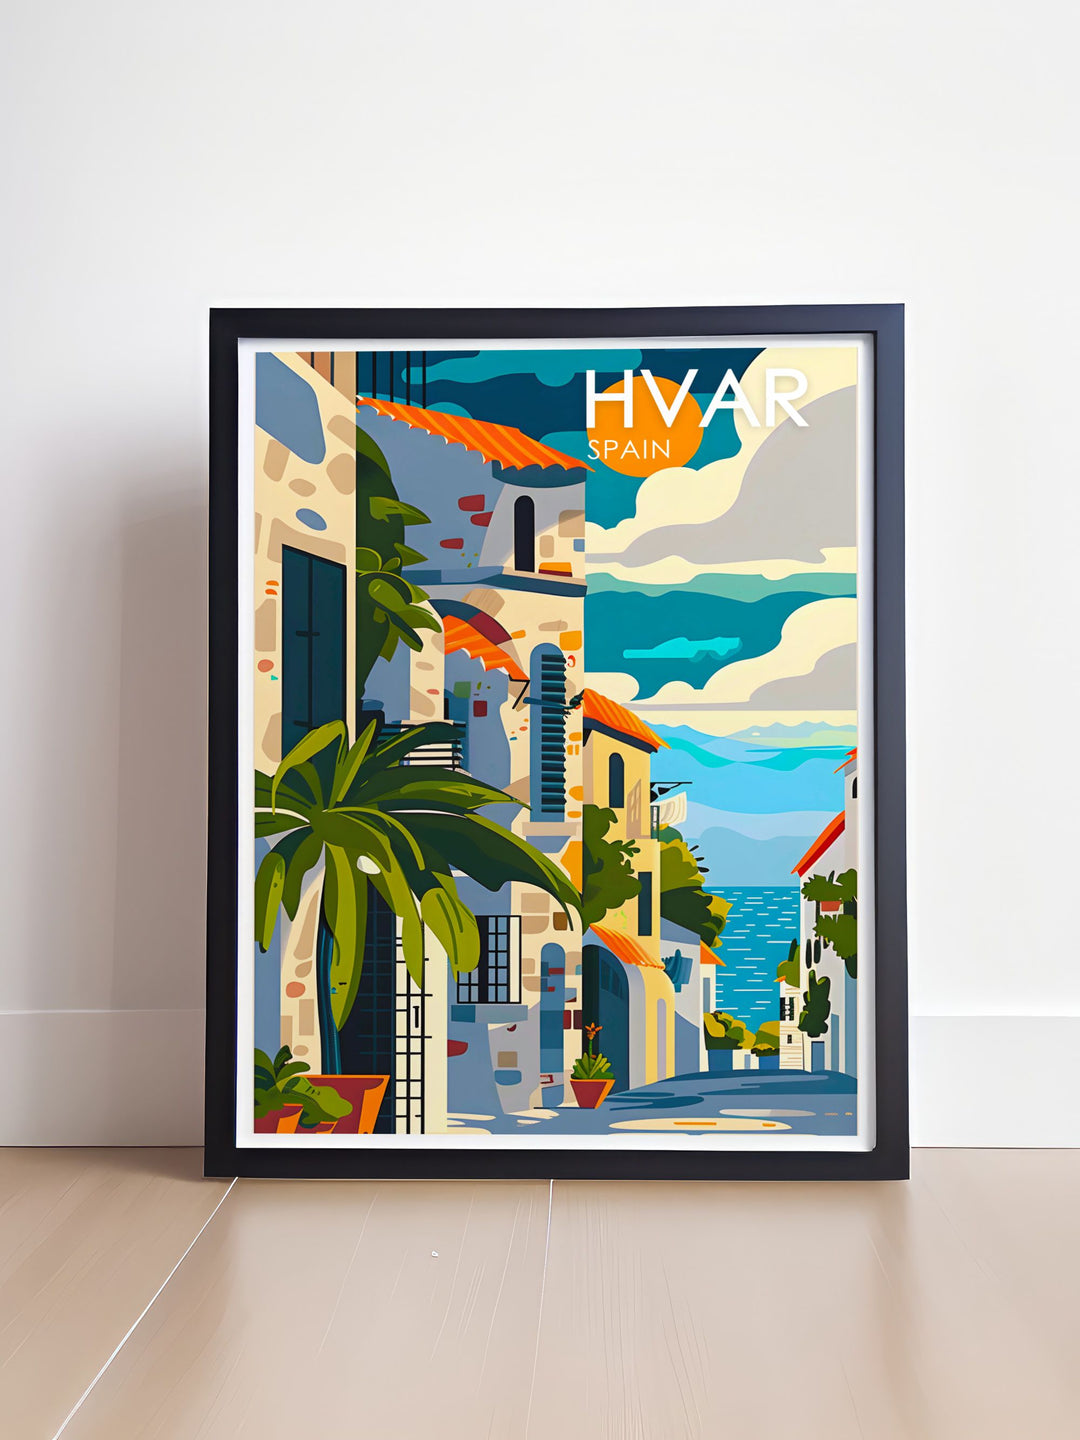 Canvas art of Hvar Harbour, highlighting its blend of traditional fishing boats and modern yachts. This piece reflects the dynamic maritime heritage of Hvar, ideal for enhancing any coastal themed decor.